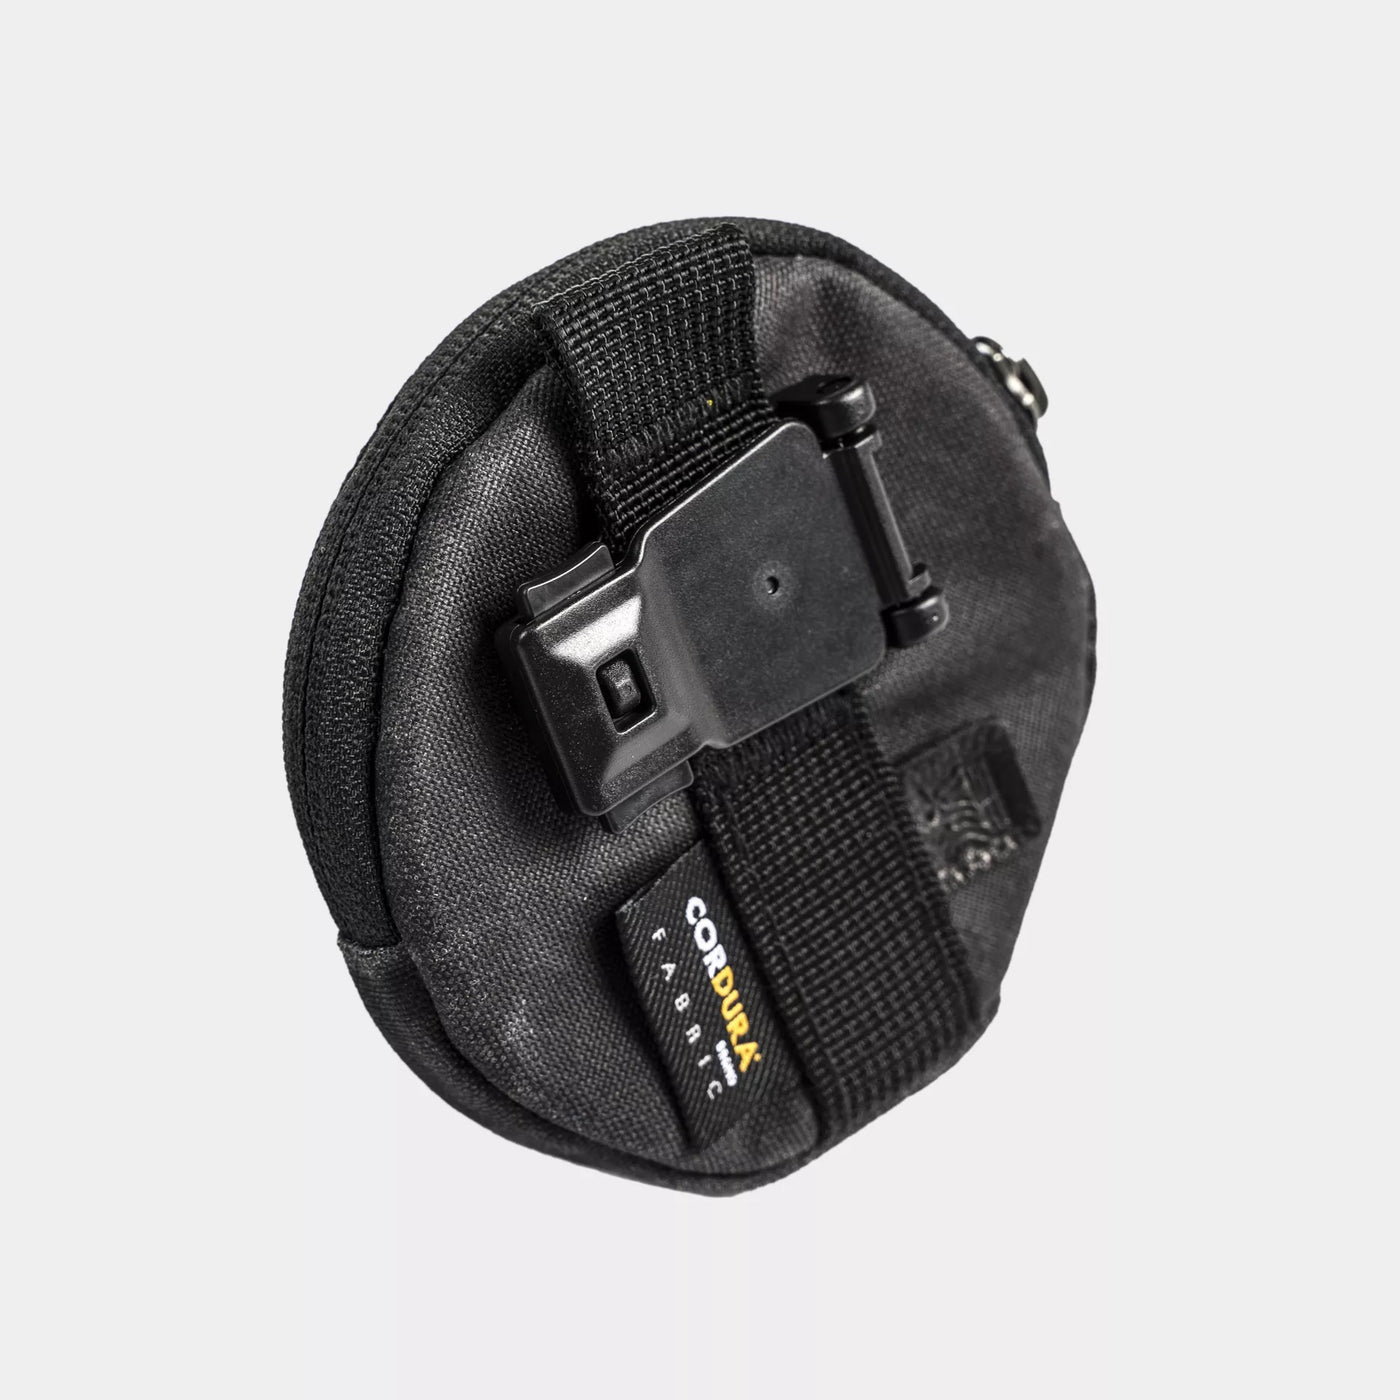 Add-on Coin Pouch Module